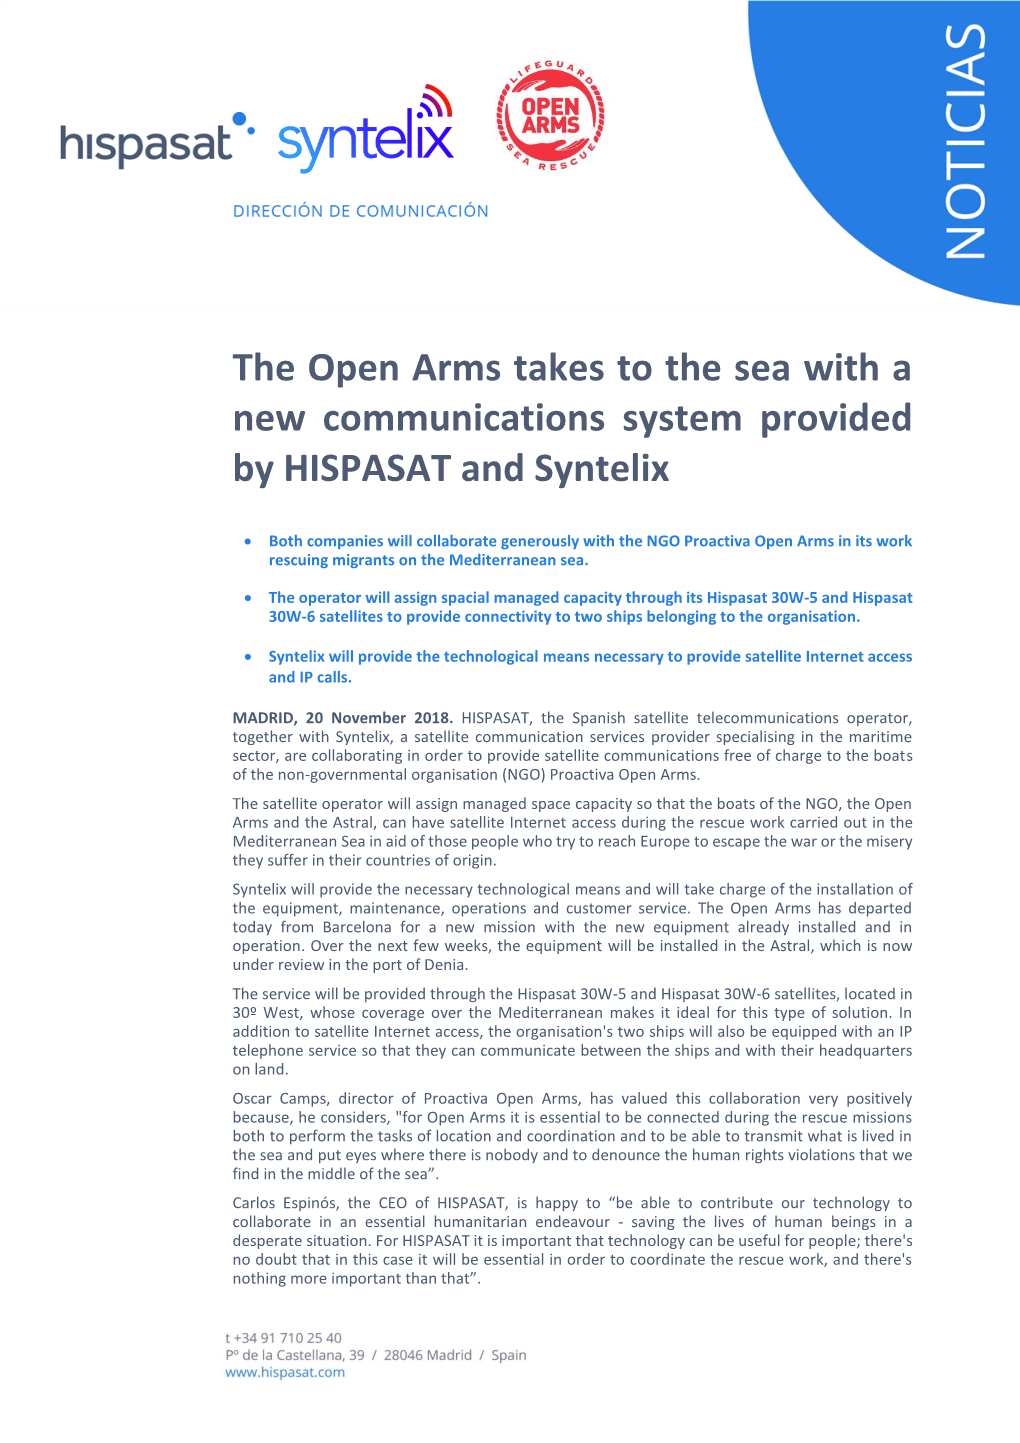 The Open Arms Takes to the Sea with a New Communications System Provided by HISPASAT and Syntelix